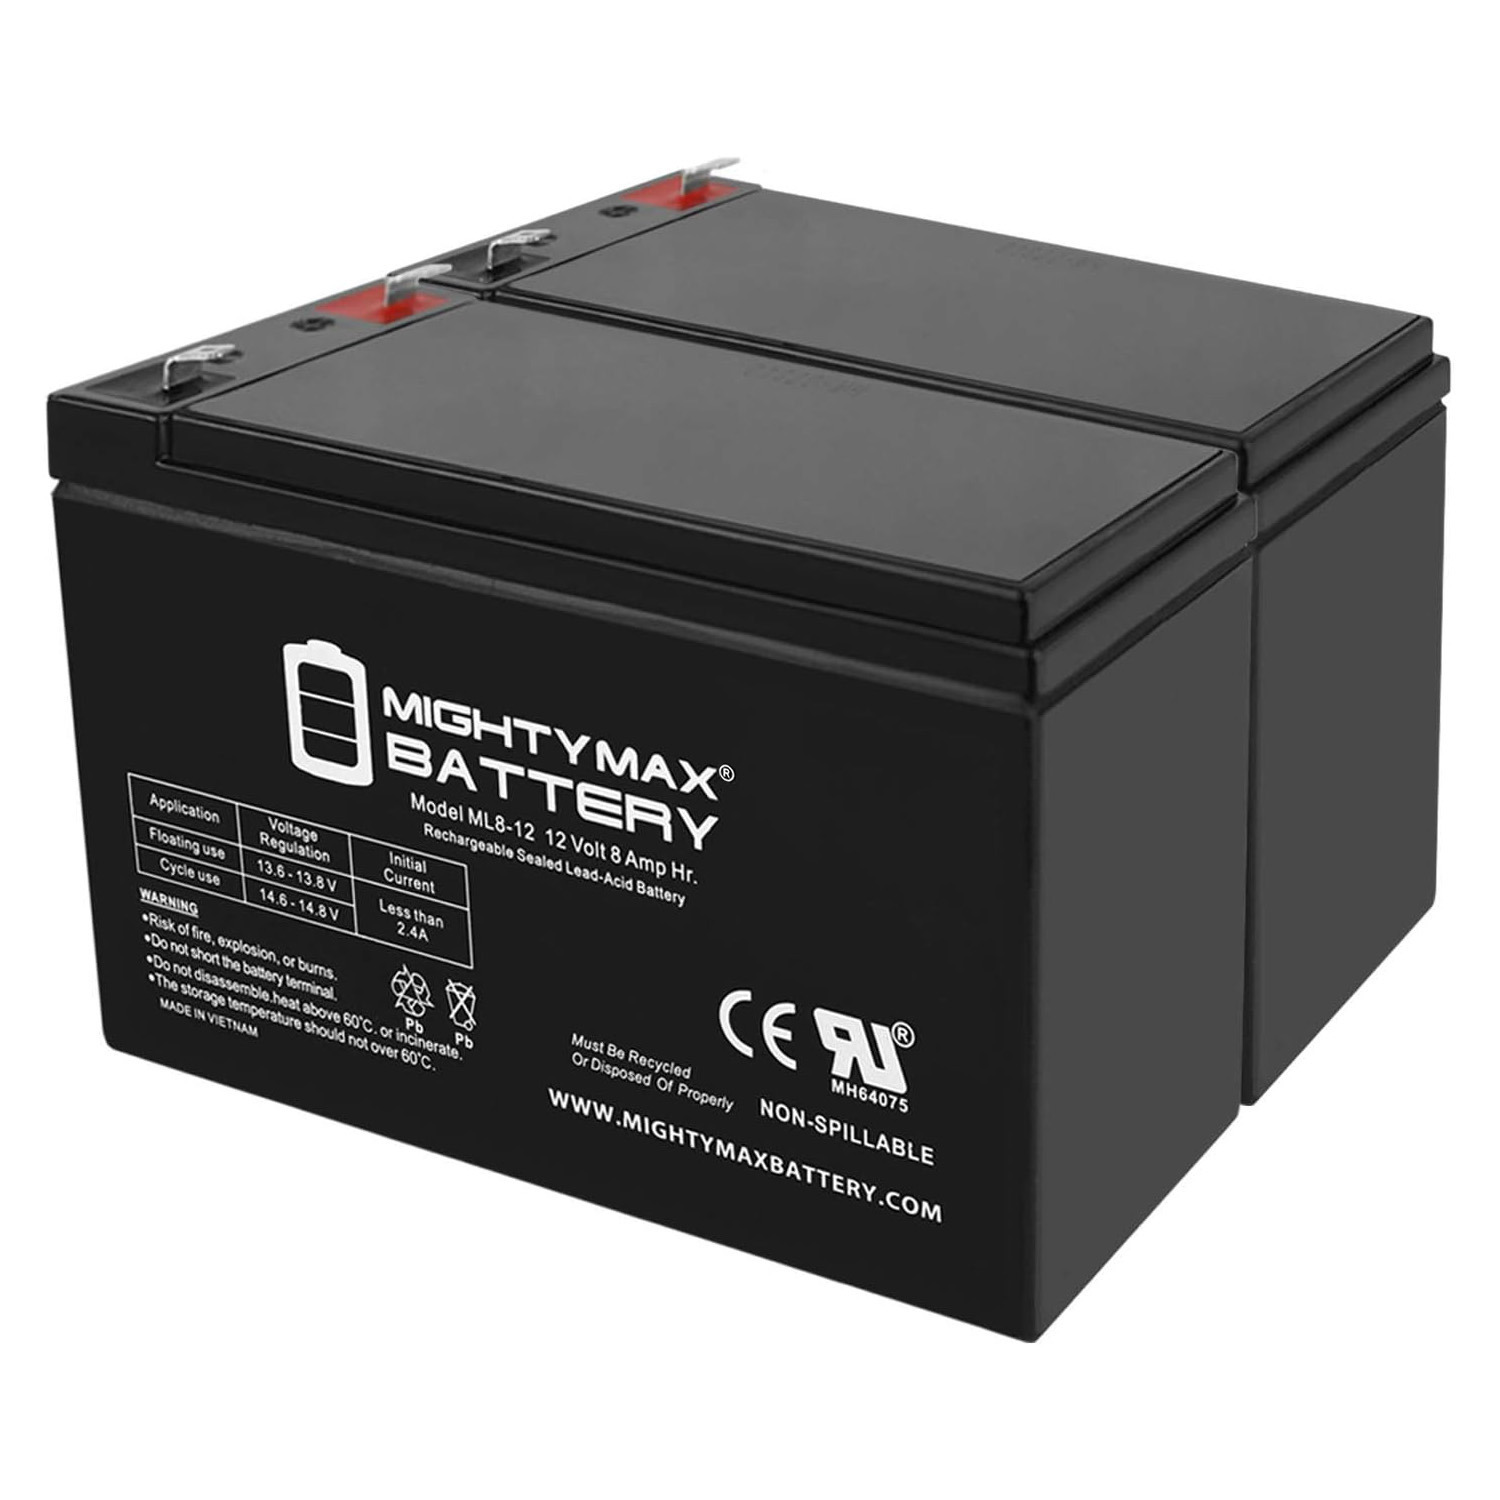 12V 8Ah Battery Replacement for Sola B510-600-U, B510-900-A - 2 Pack